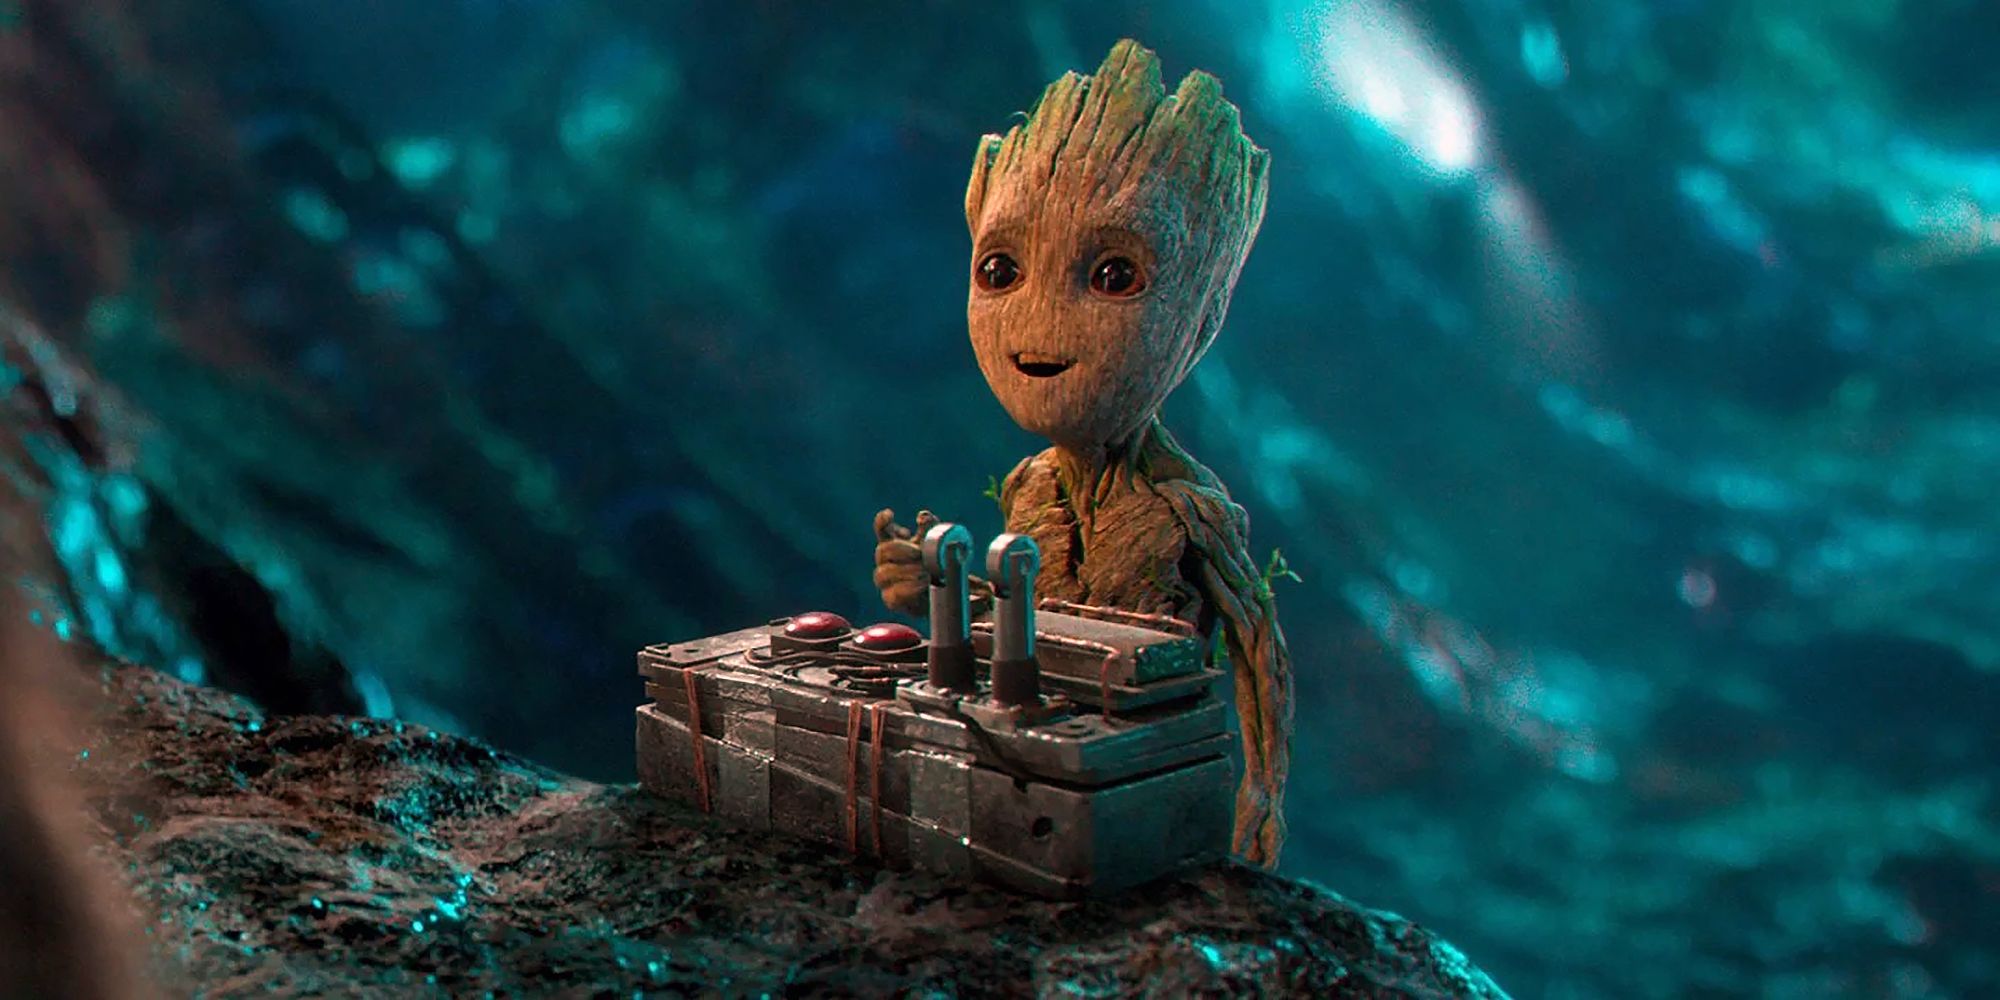 Baby Groot breaks the fourth wall in Guardians of the Galaxy Vol 2